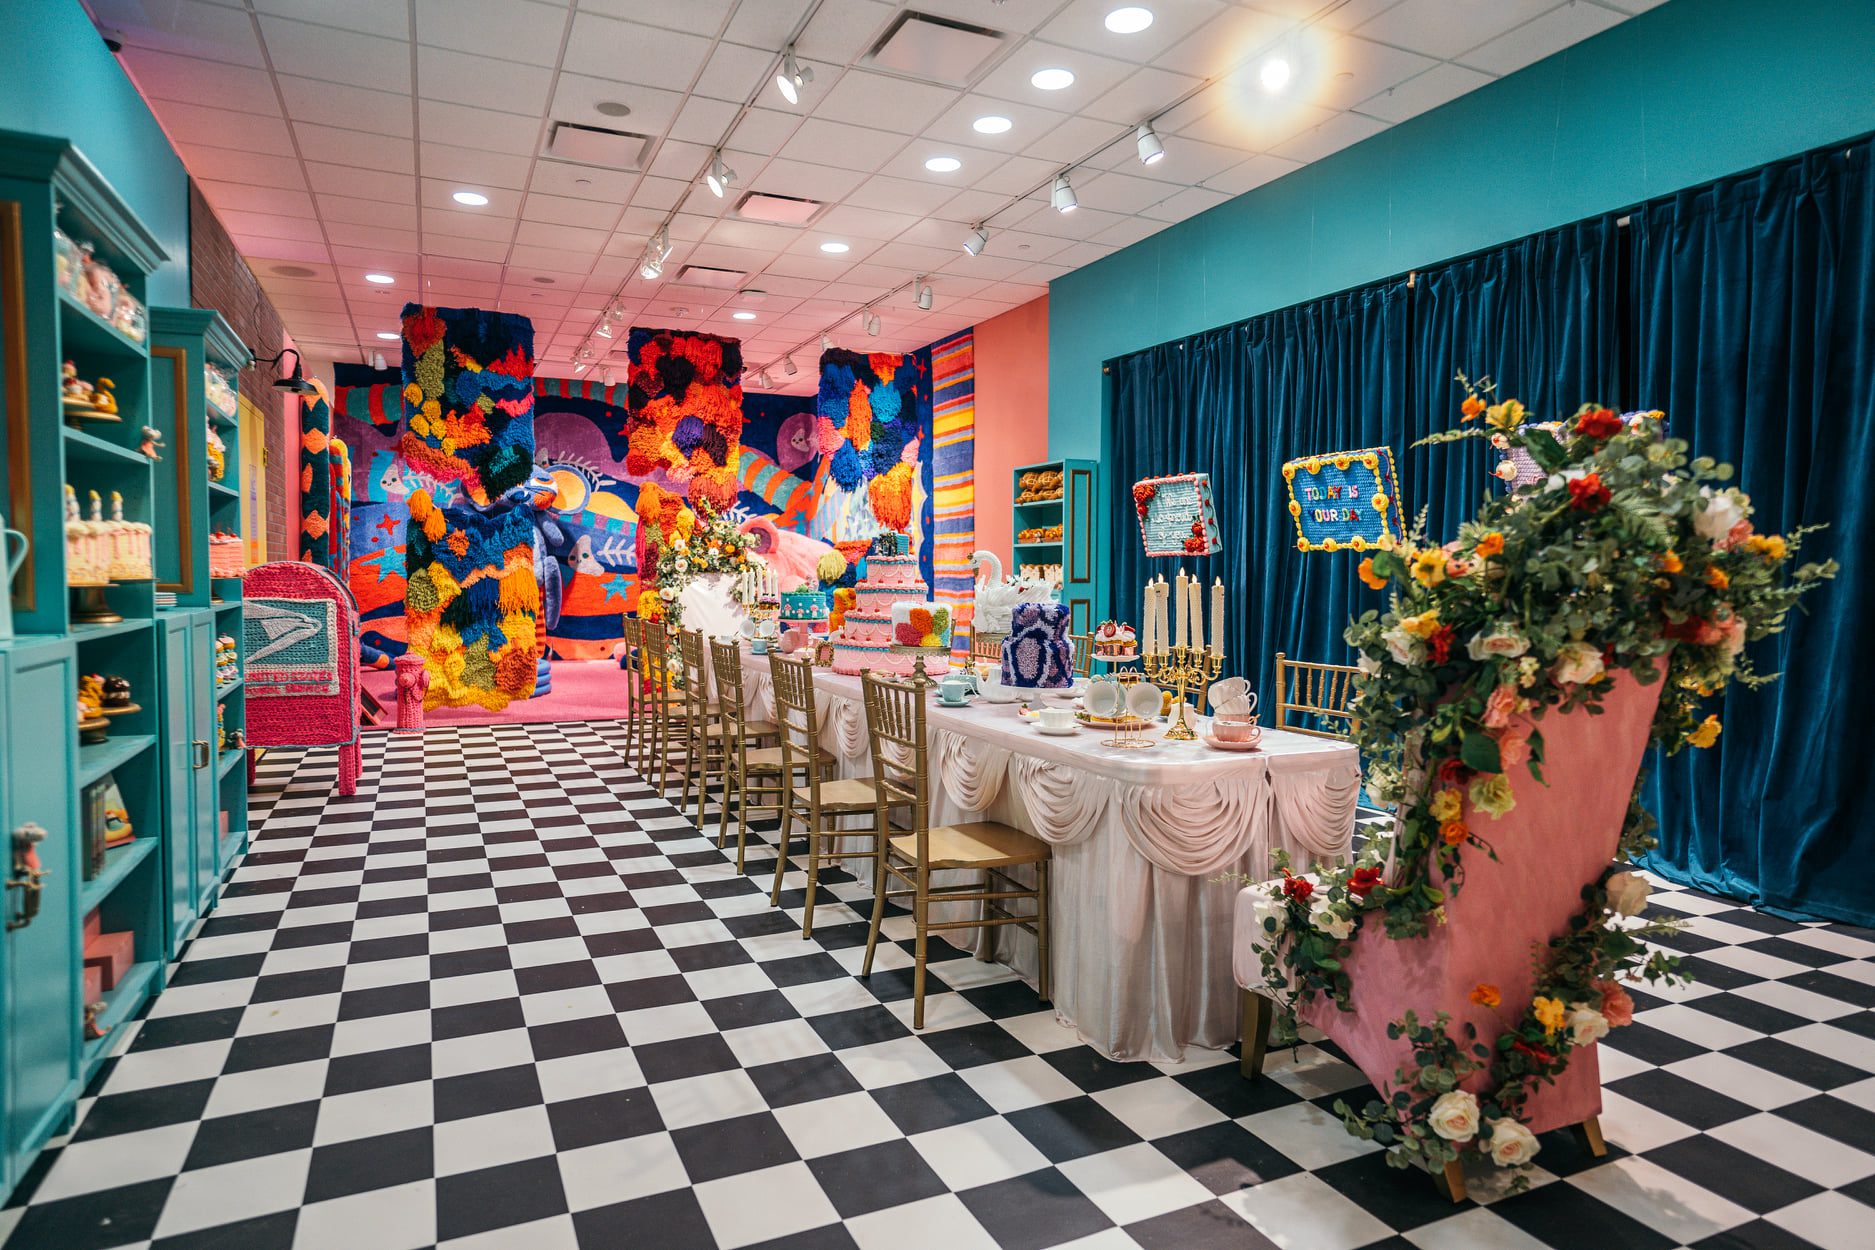 Sweet Tooth Hotel Opening Summer Immersive-Art Gallery